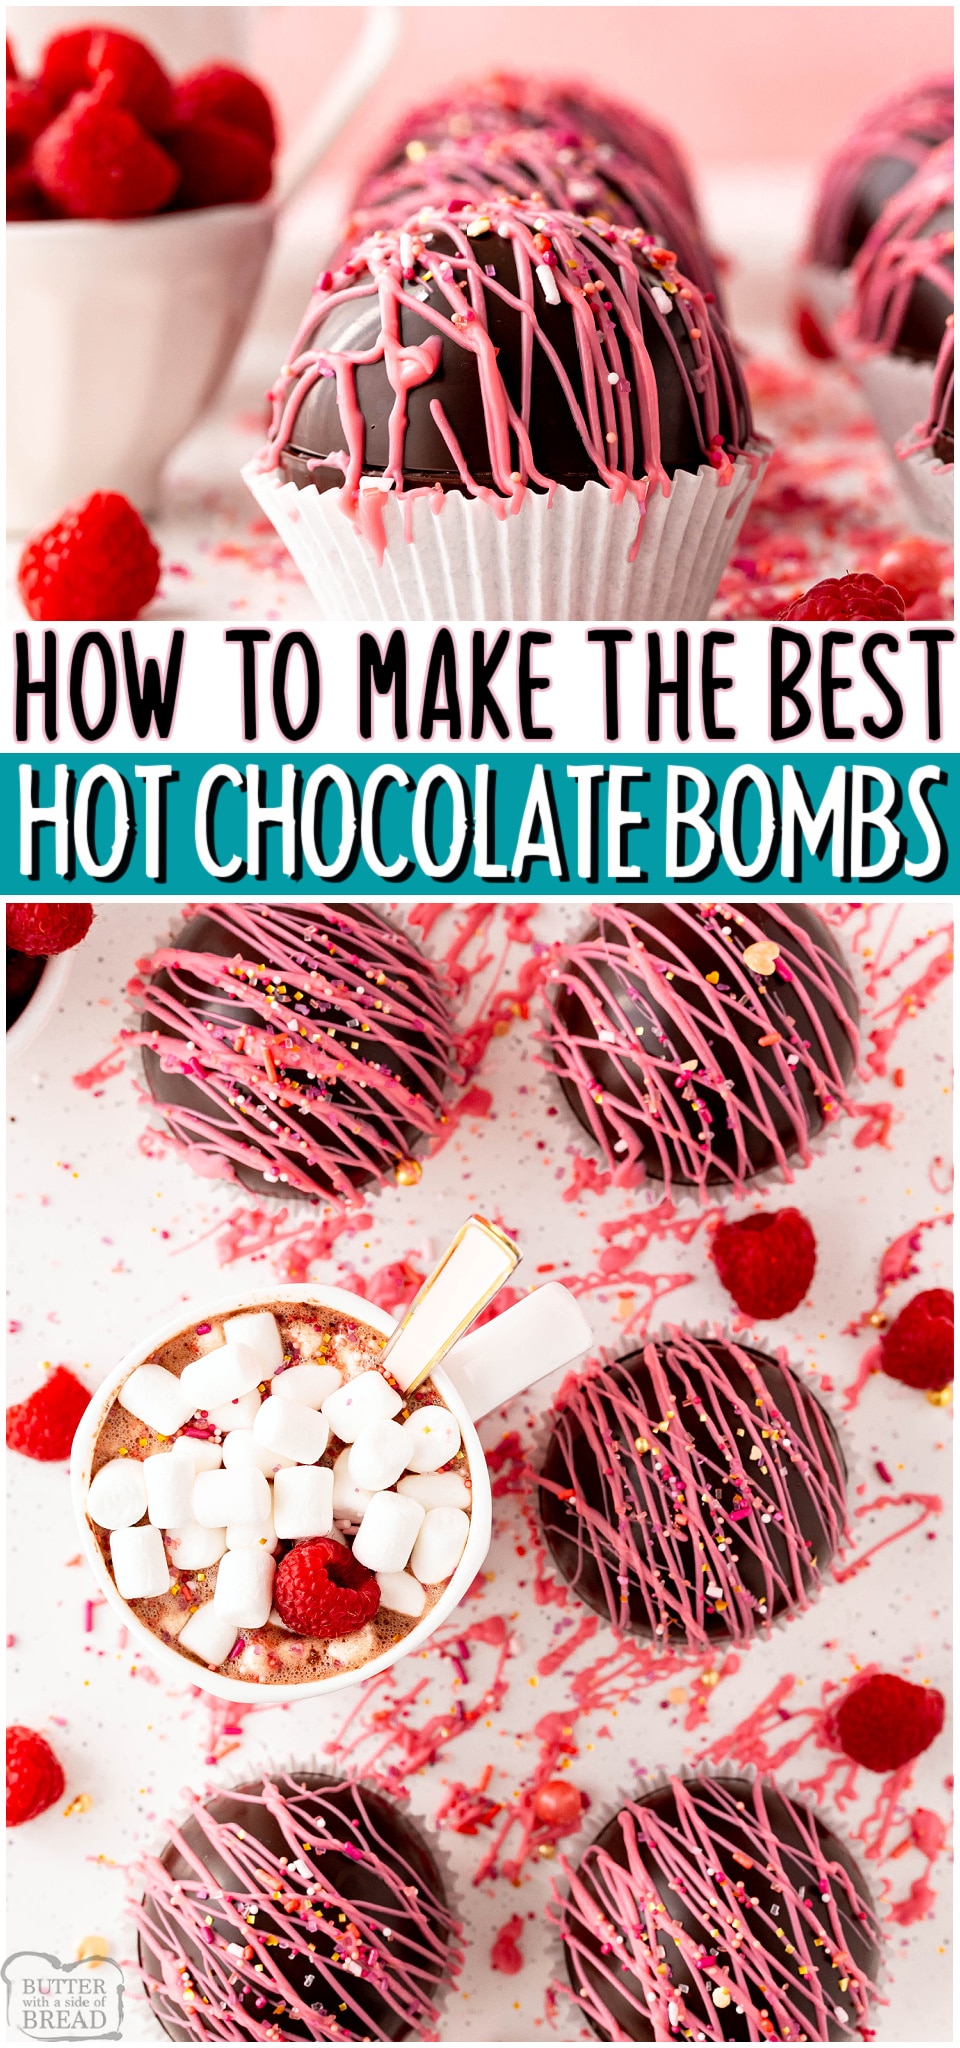 Step-by-step tips for How to Make Hot Chocolate Bombs in this fantastic tutorial for the sweet chocolate treats everyone loves! Gorgeous Raspberry Hot Chocolate Bombs recipe perfect for Mother's Day.